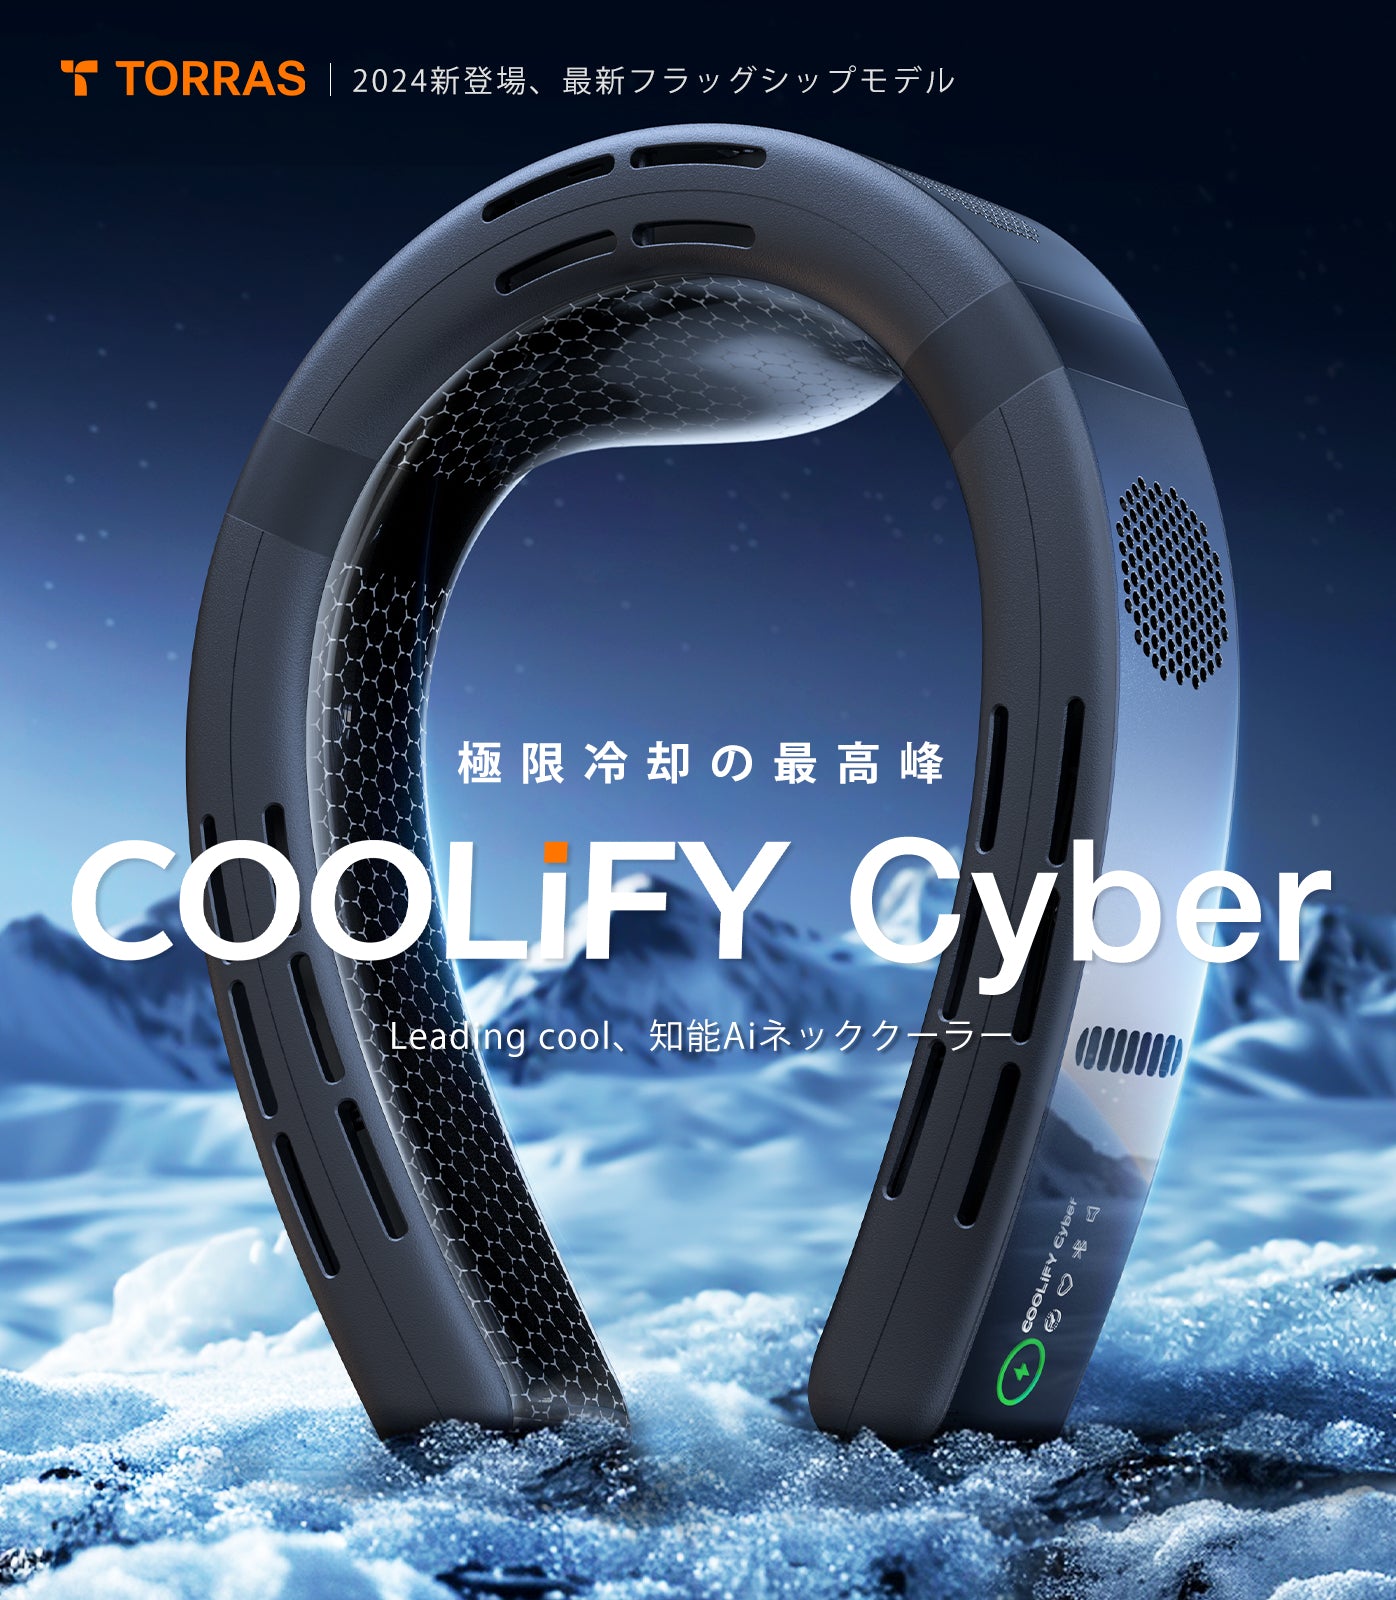 COOLiFY Cyber 最強冷却ウェアラブルエアコン